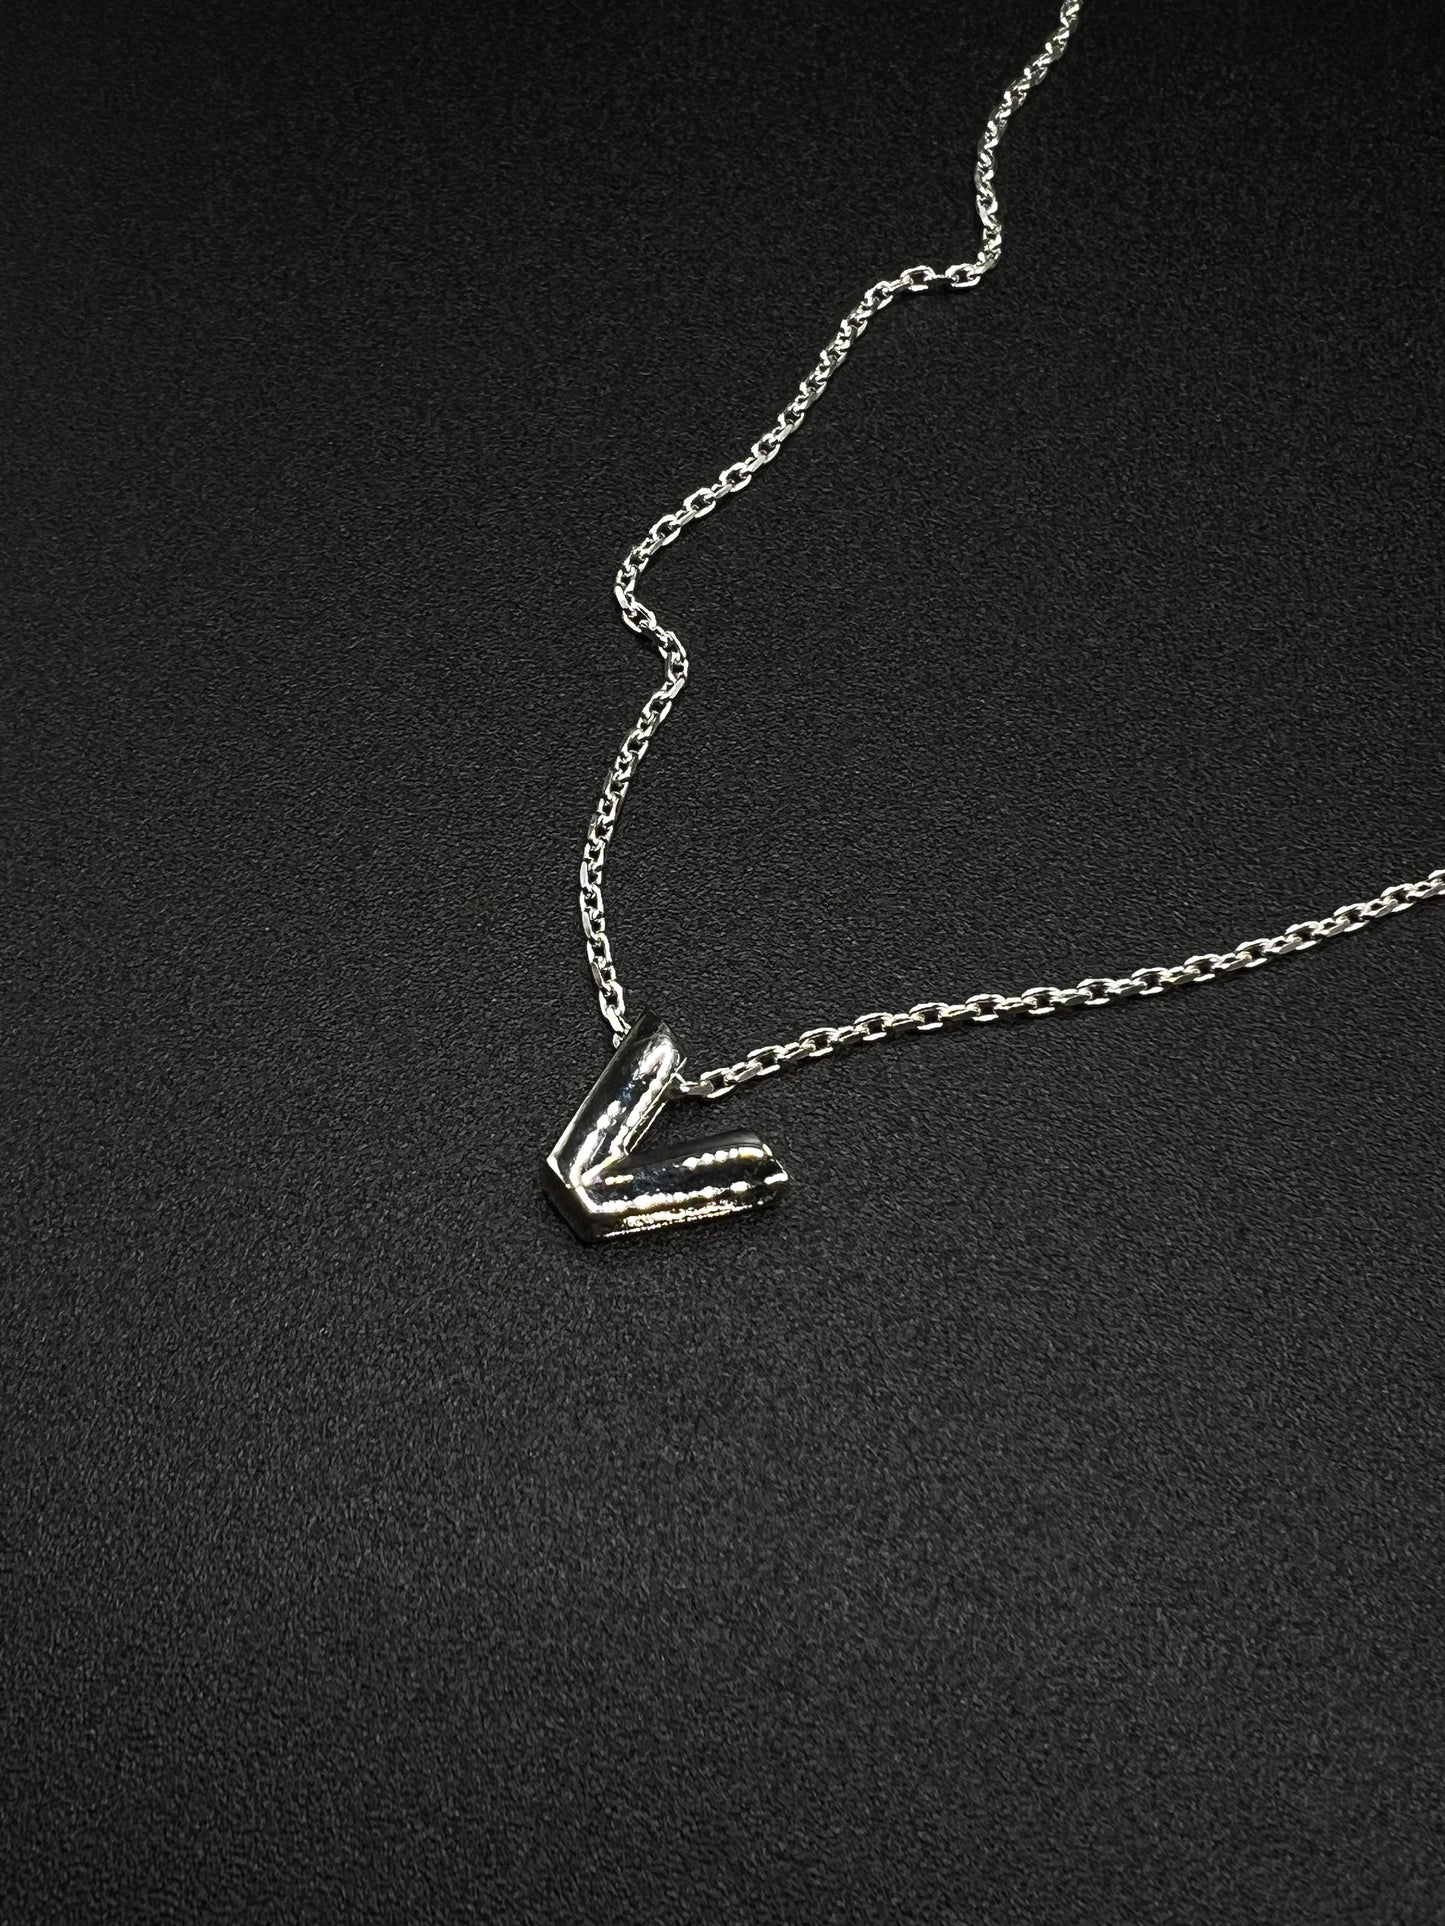 Initial "V" necklace -silver925